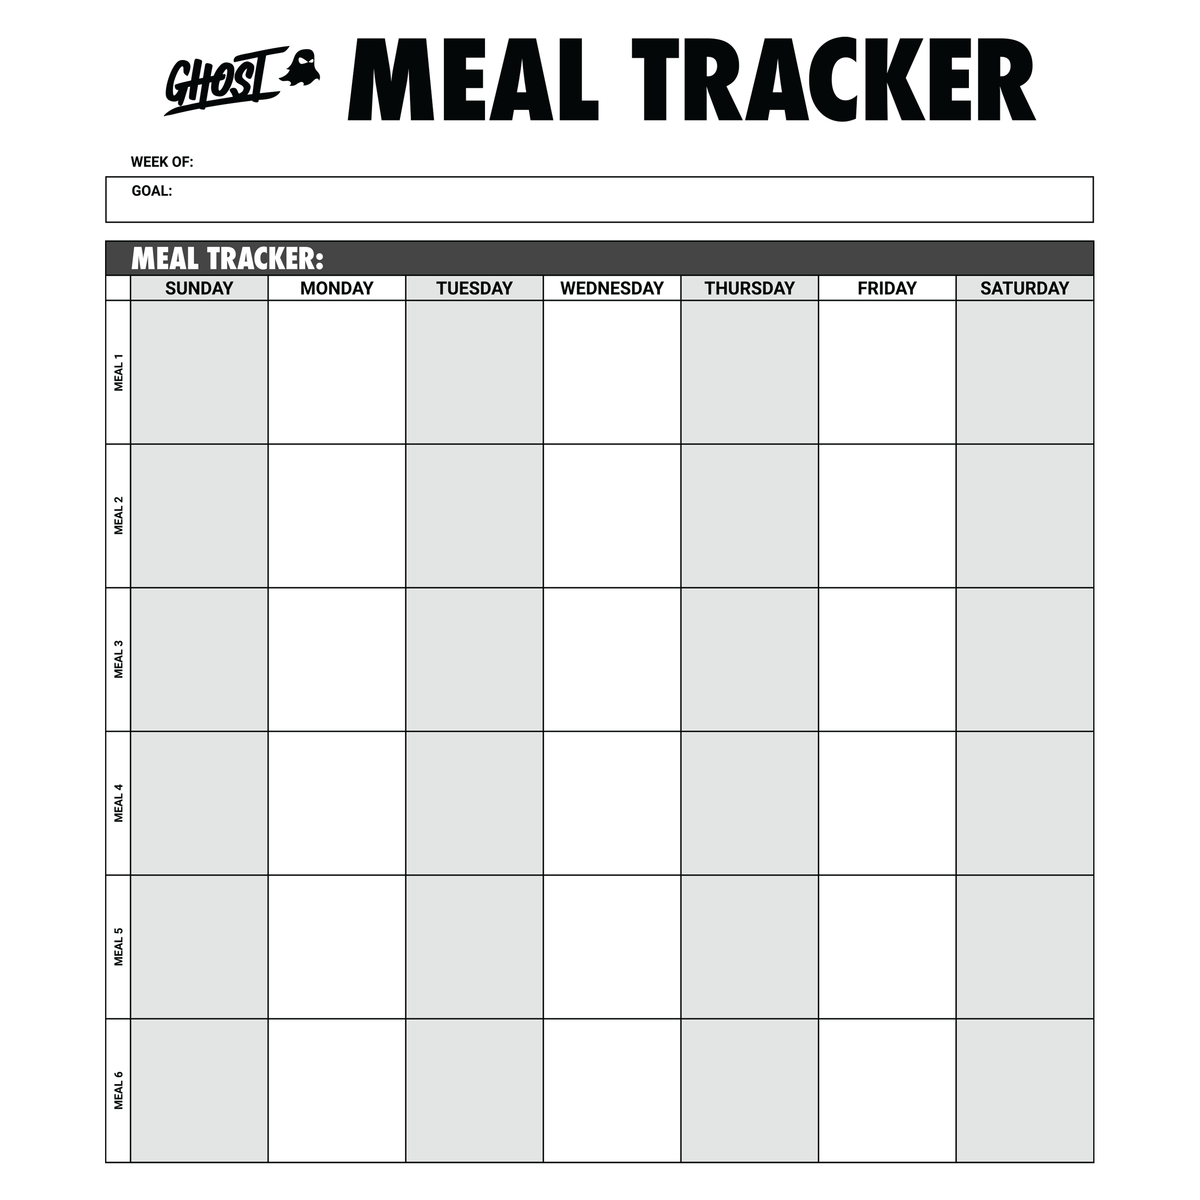 GHOST® MEAL TRACKER